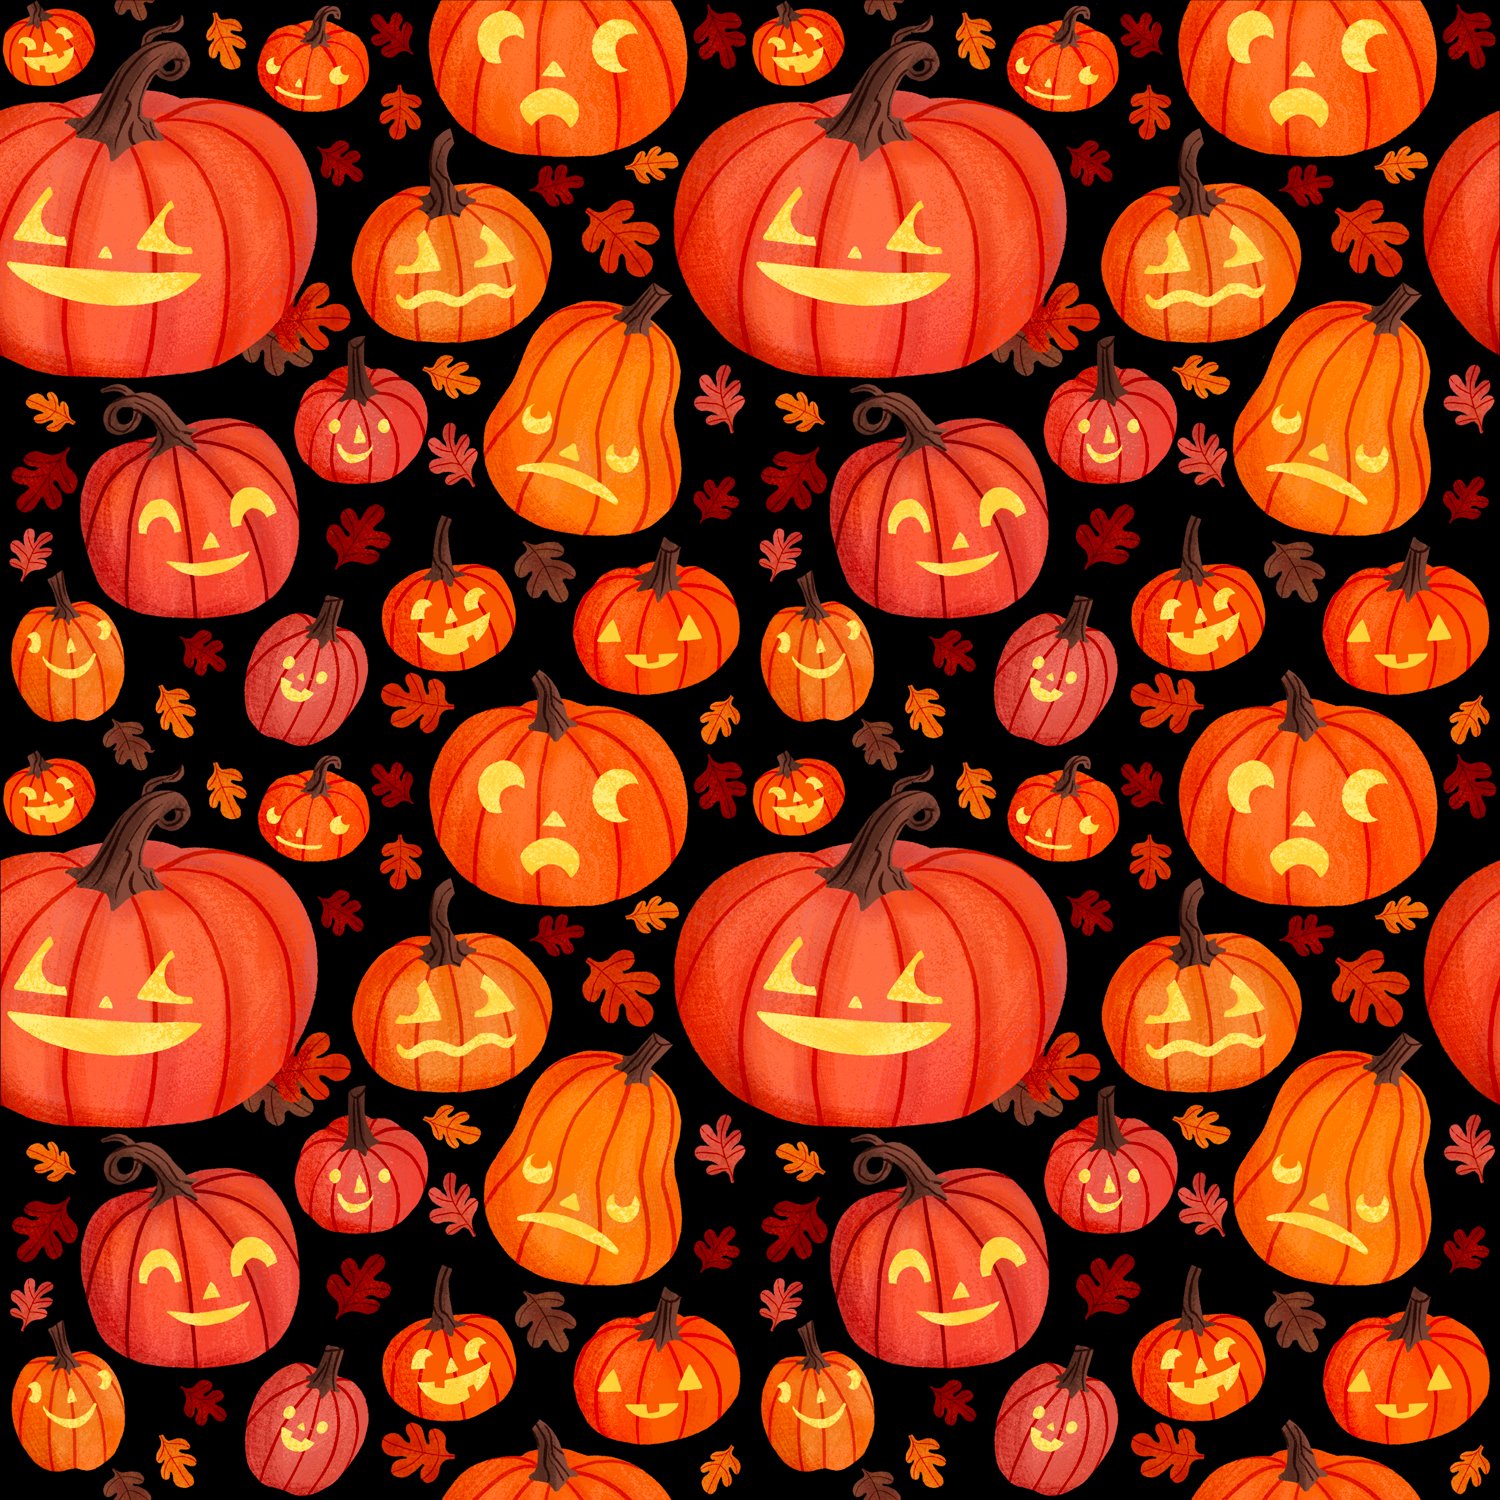 The Pumpkin Party